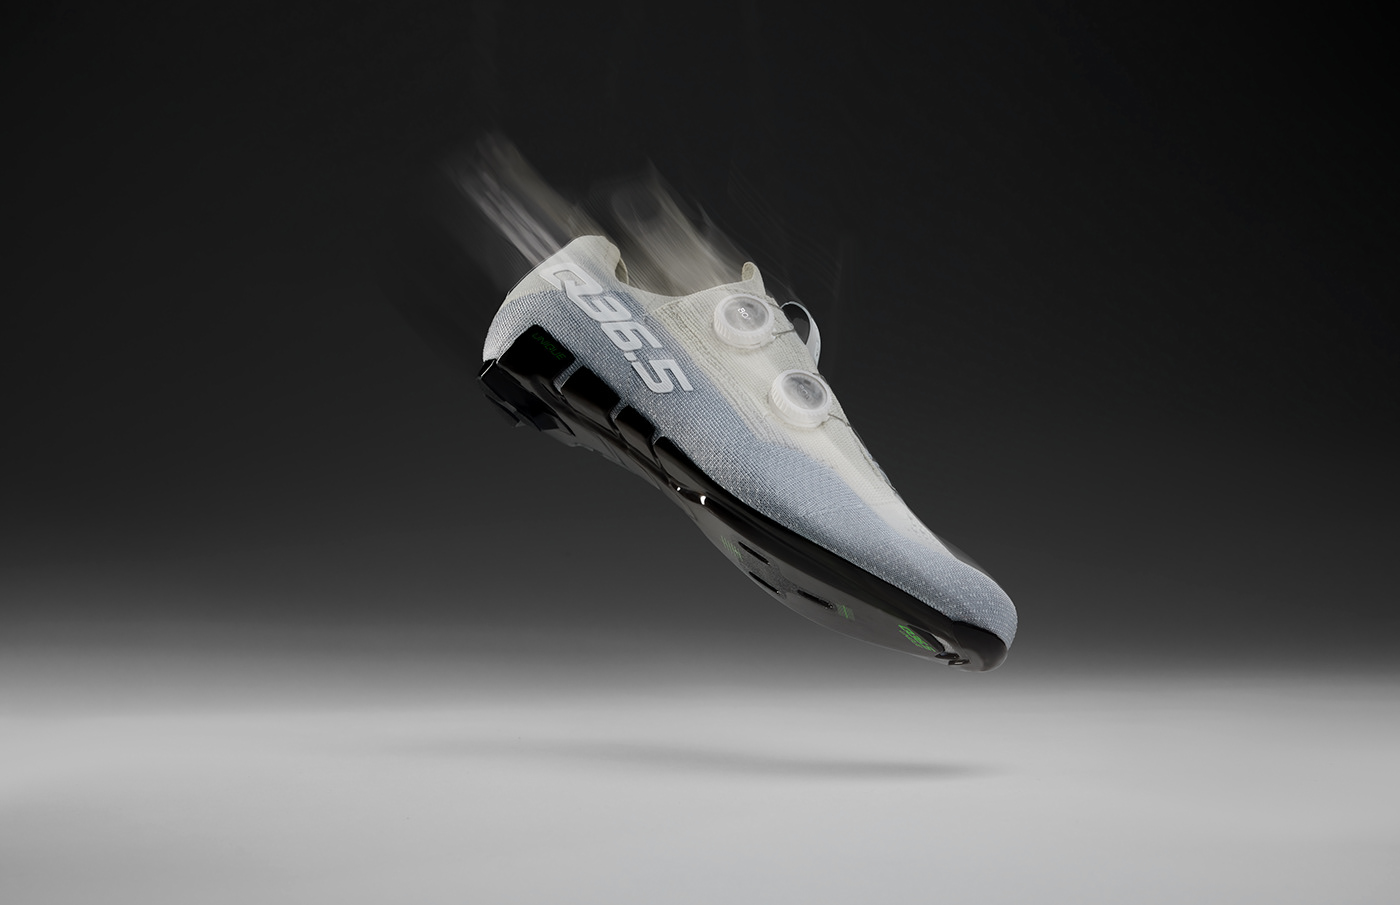 shoes Cycling Product Photography highendretouch light speed fast sports footweardesign studiophotography